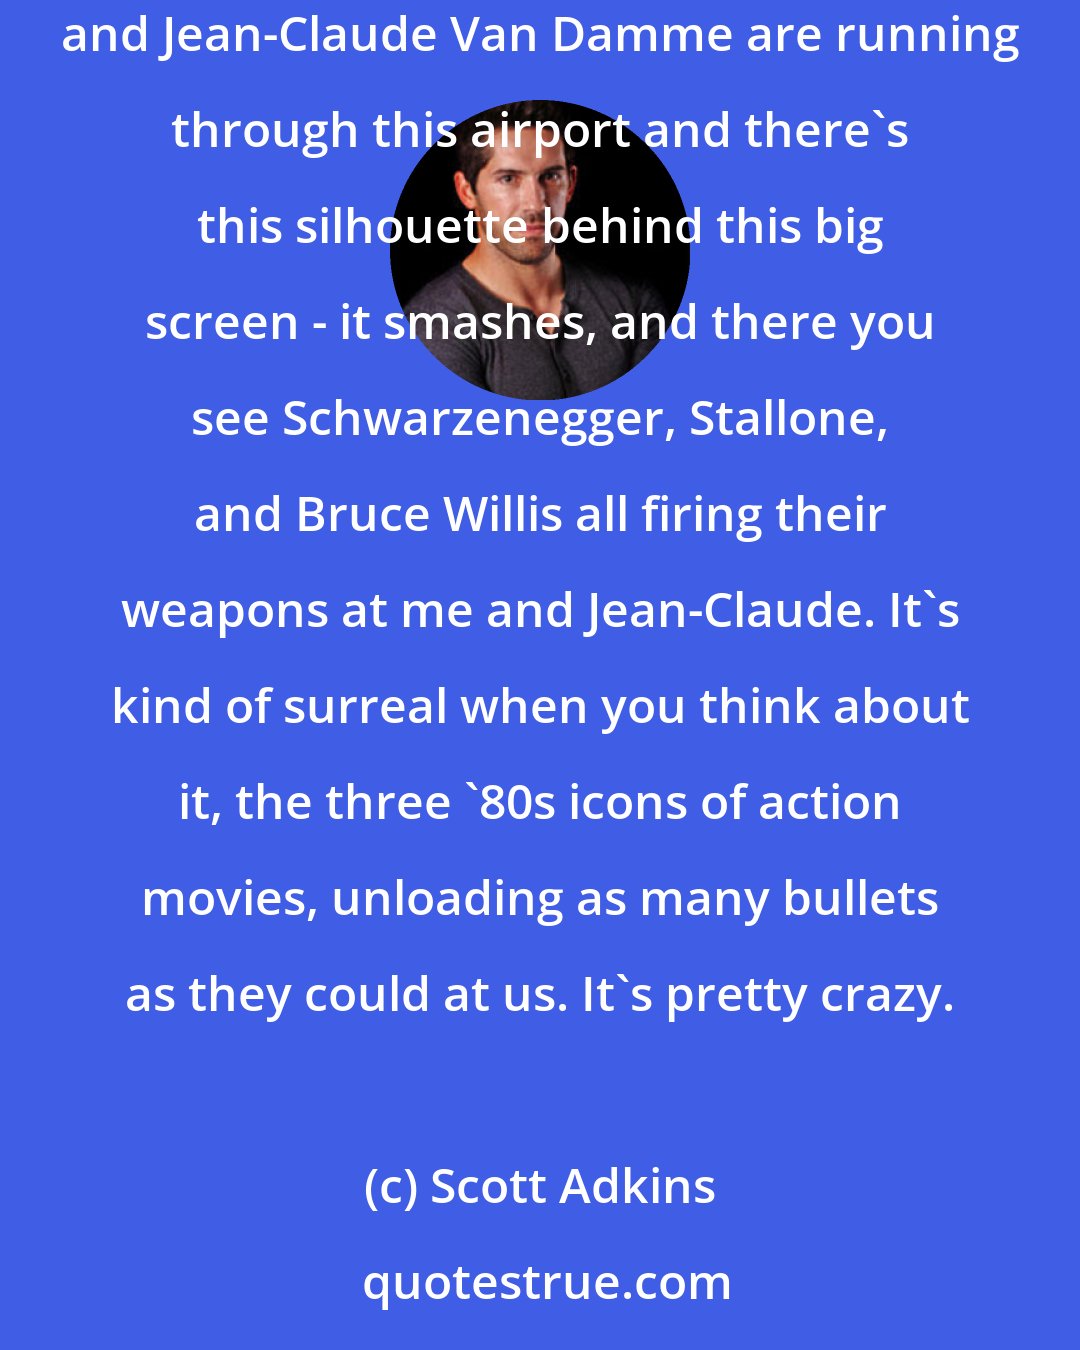 Scott Adkins: It was weird working with all of them - Stallone, Schwarzenegger, Bruce Willis, Chuck Norris. There's a sequence in the movie where myself and Jean-Claude Van Damme are running through this airport and there's this silhouette behind this big screen - it smashes, and there you see Schwarzenegger, Stallone, and Bruce Willis all firing their weapons at me and Jean-Claude. It's kind of surreal when you think about it, the three '80s icons of action movies, unloading as many bullets as they could at us. It's pretty crazy.